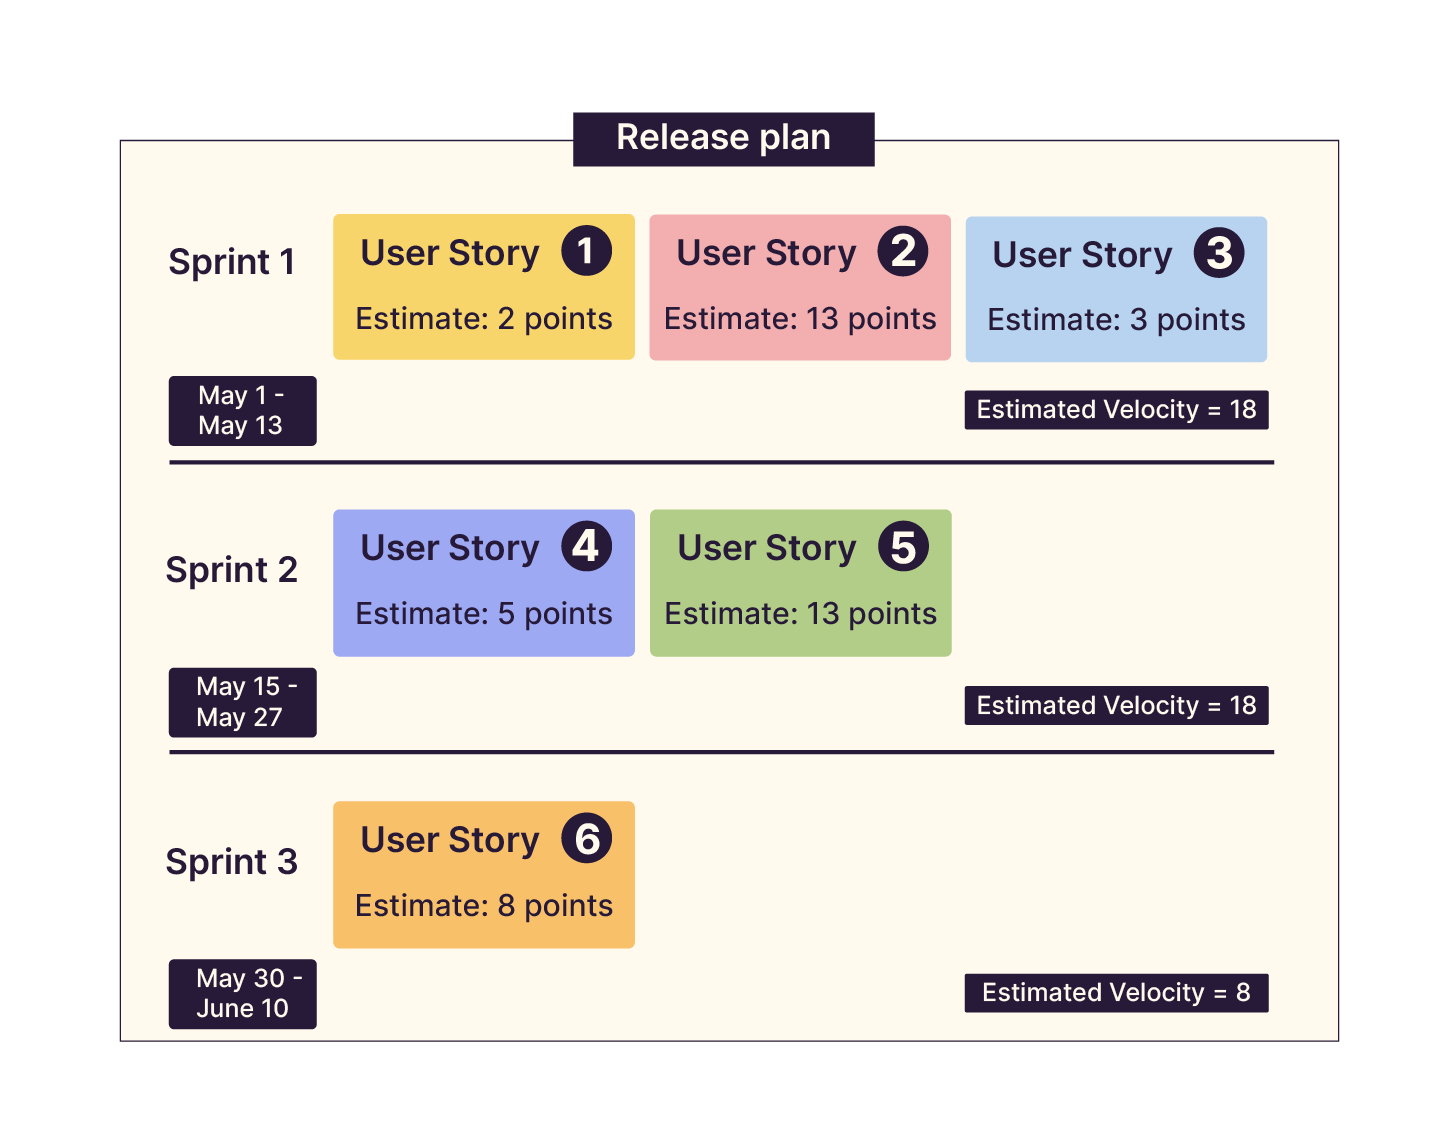 One User Stories is in a Sprint. It has 8 Story Points.